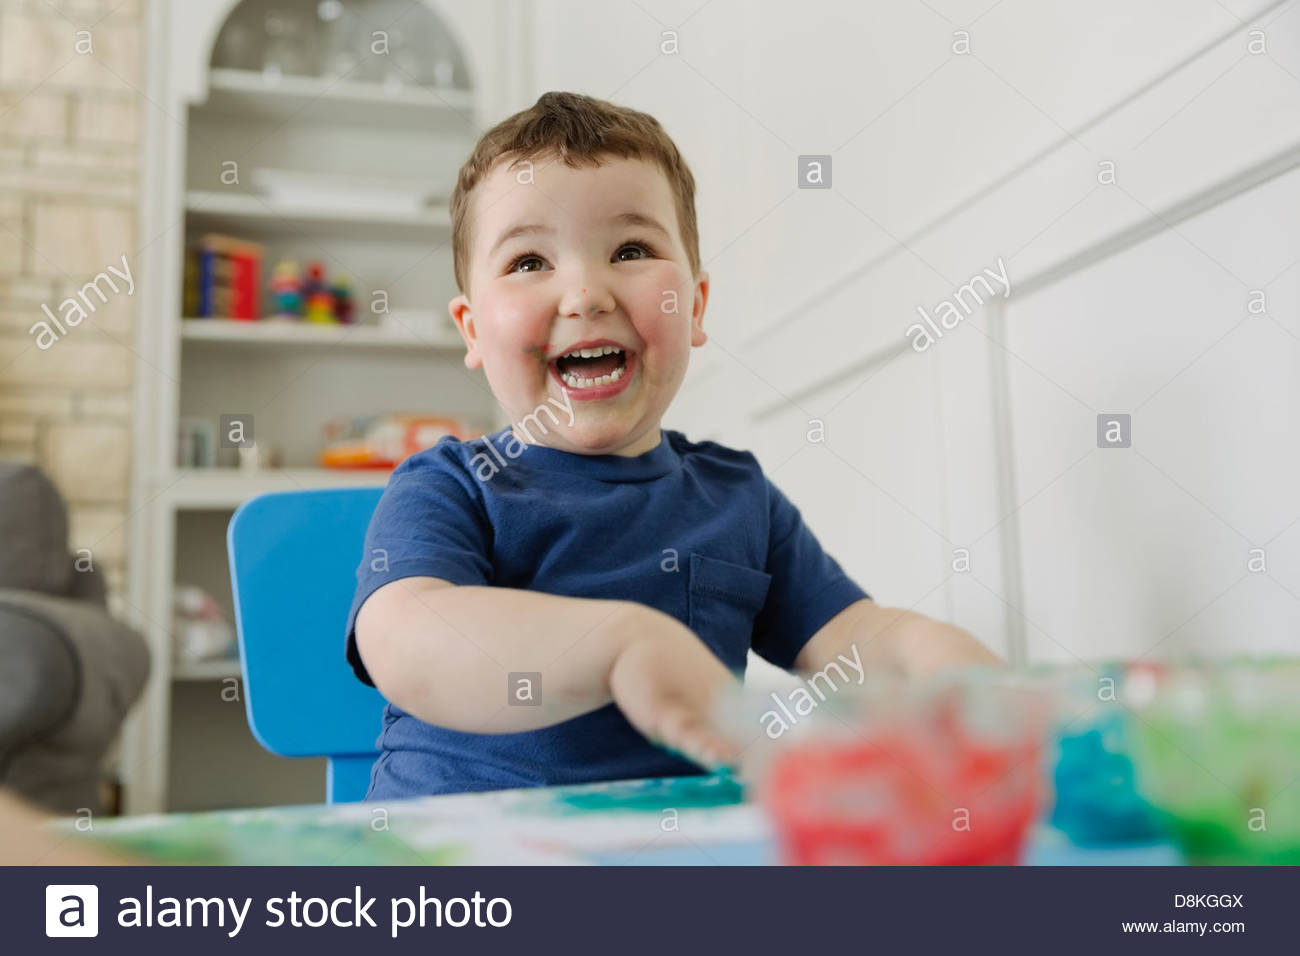 Laughing boy finger painting at home Stock Photo